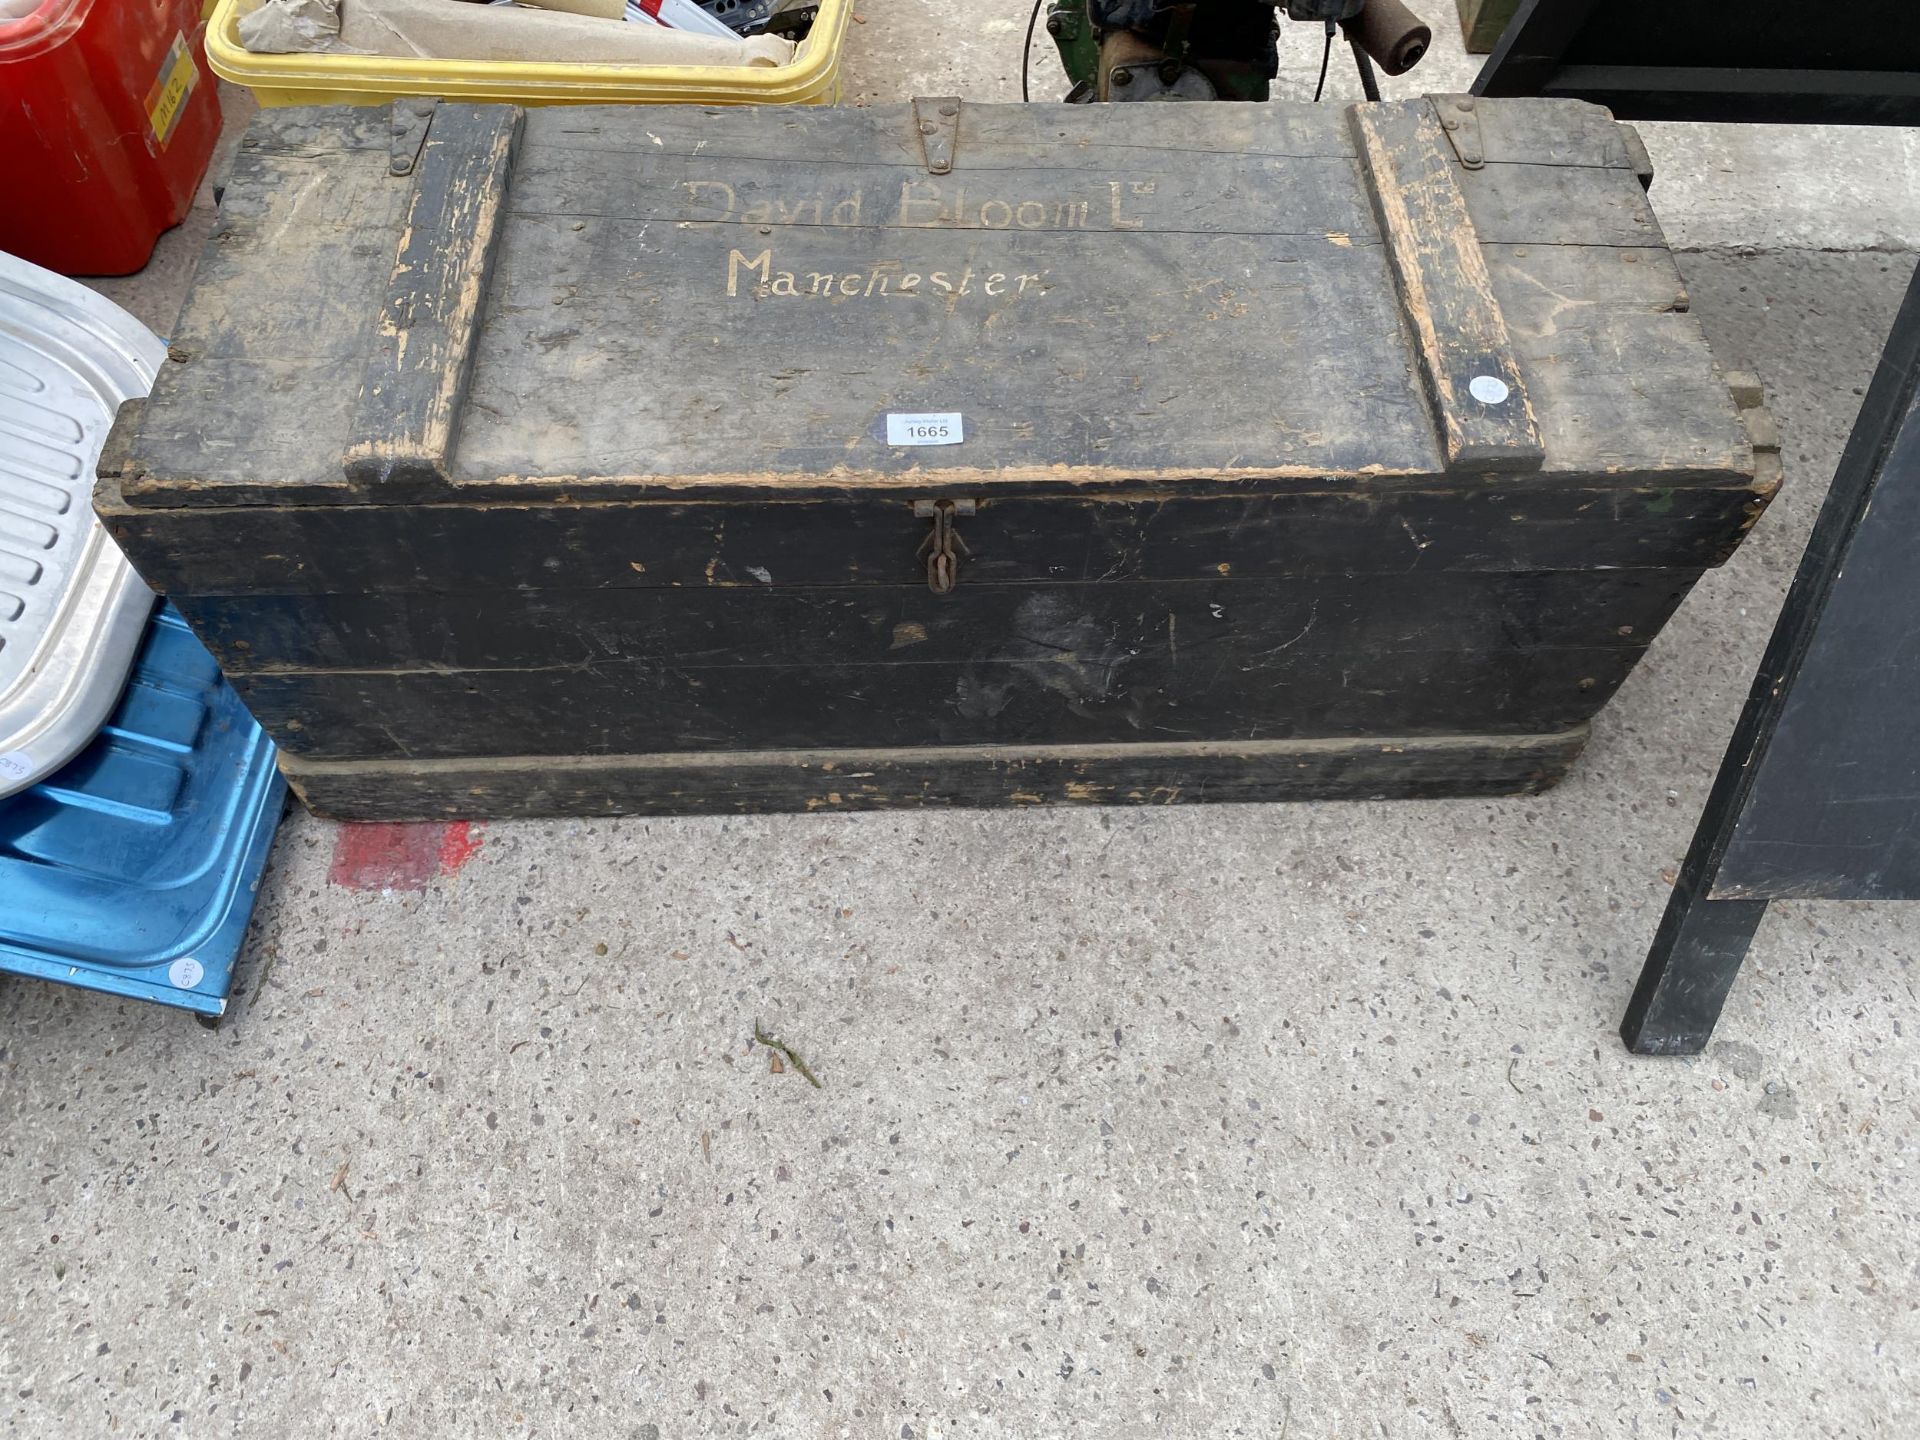 A VINTAGE WOODEN TOOL CHEST BEARING THE NAME 'DAVID BLOOM LTD MANCHESTER'